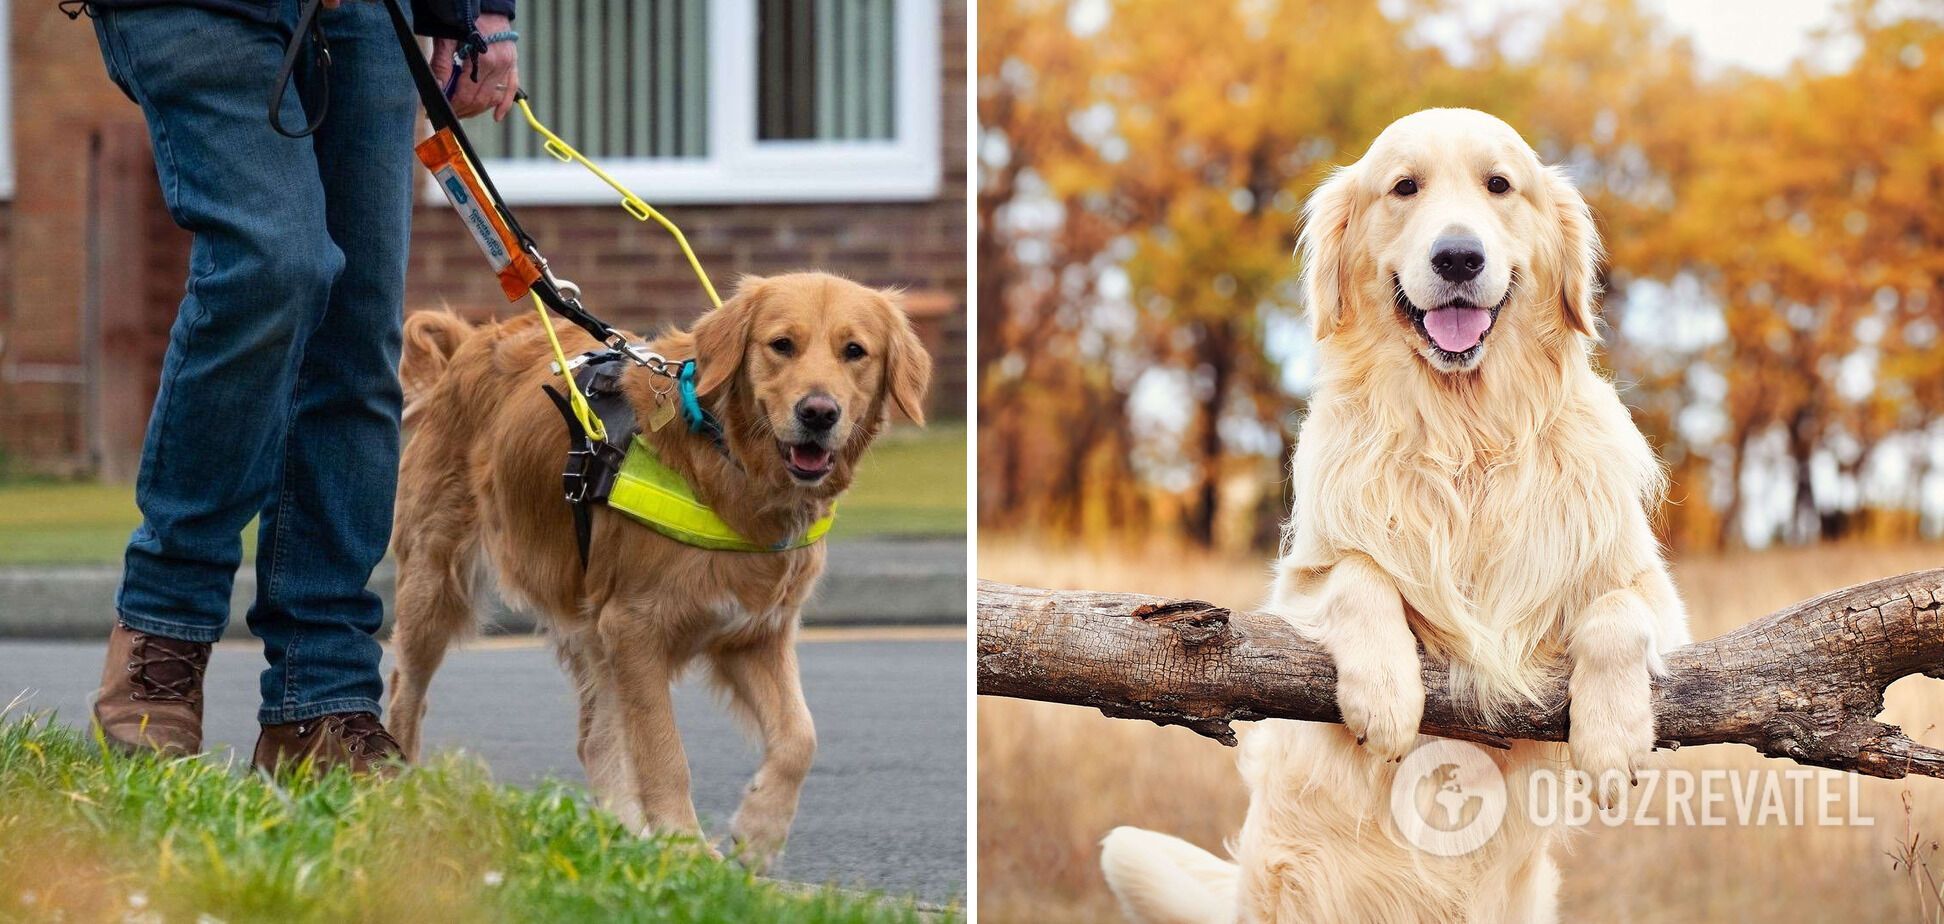 What are the best guide dog breeds for the blind: breeds and photos